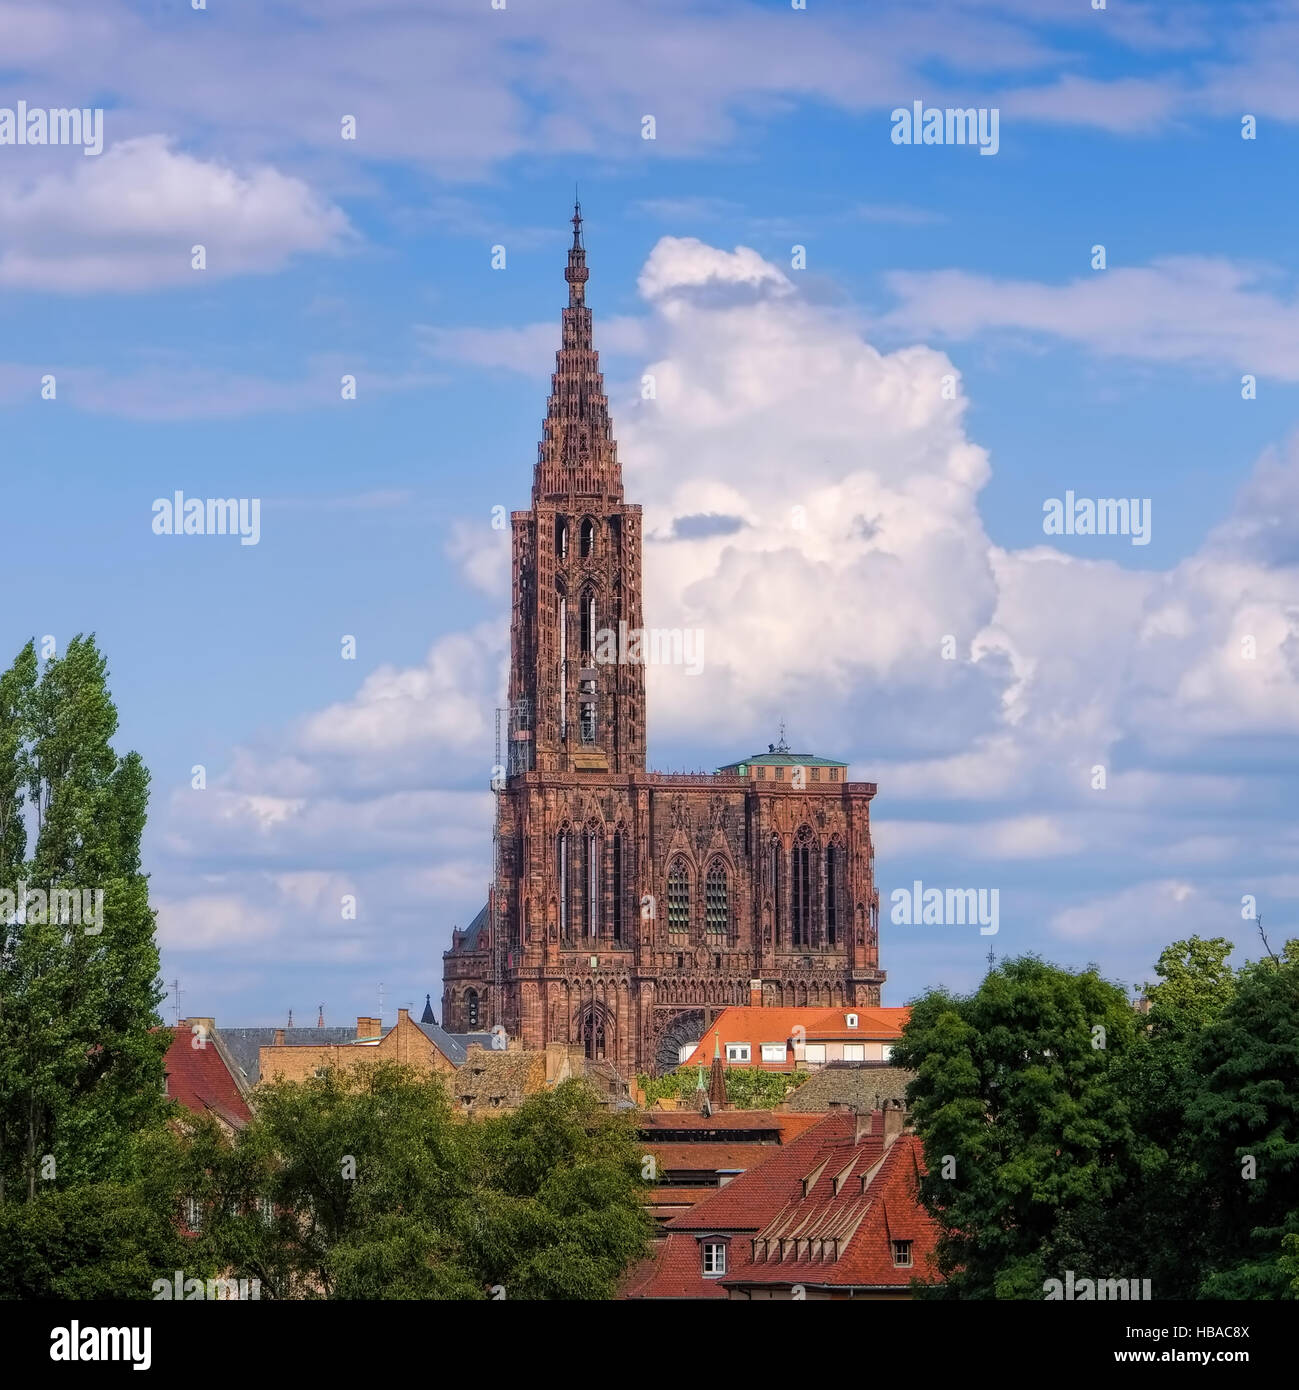 Kathedrale in Strassburg im Elsass - Strasbourg cathedral in  Alsace, France Stock Photo